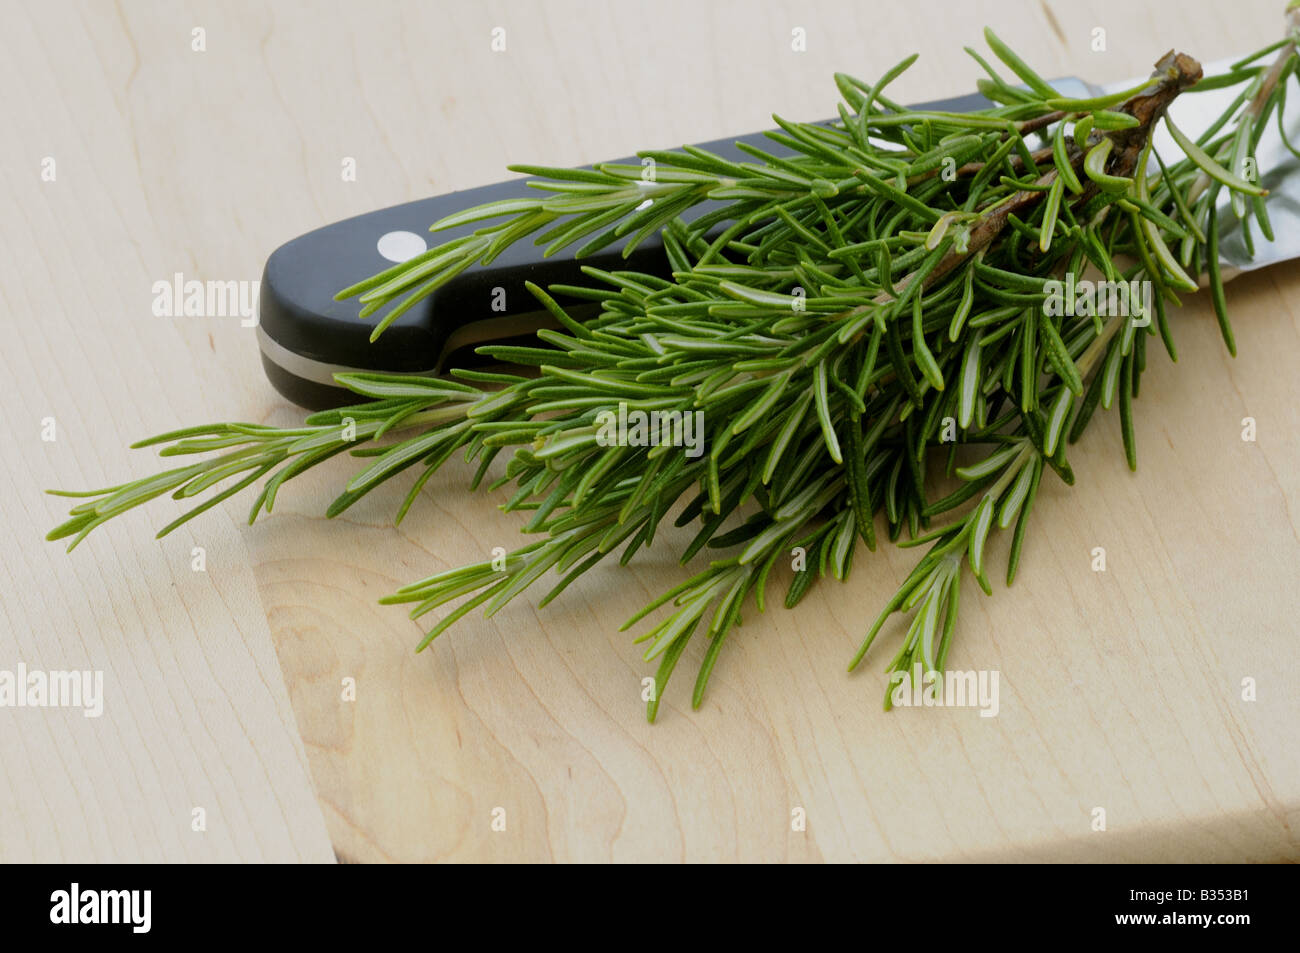 CULINARY HERBS HERB ROSEMARY Rosemarinus officinalis One of the most popular herbs used in cooking Stock Photo